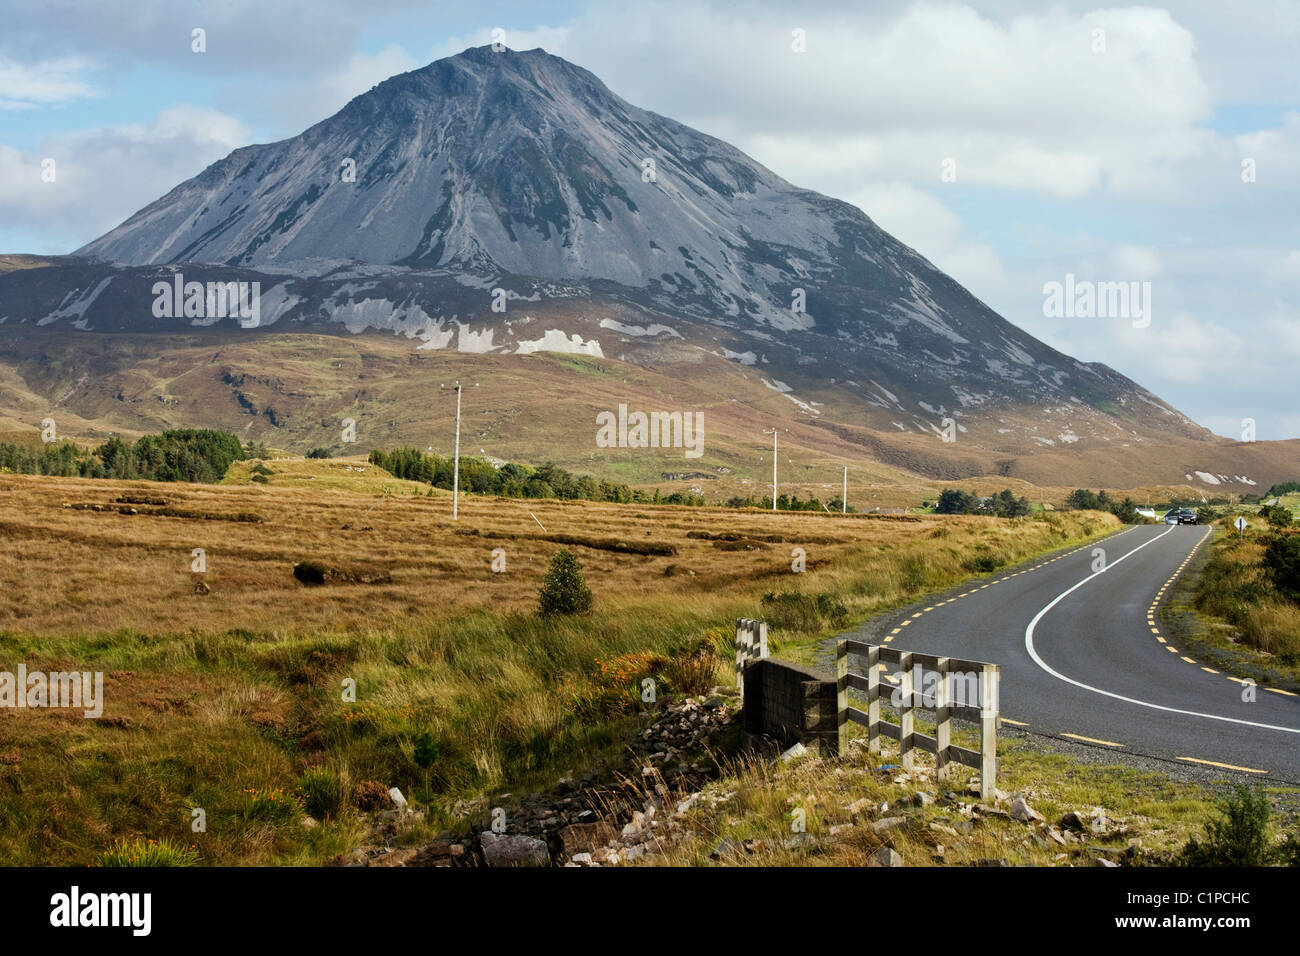 Republic of Ireland, County Donegal, Gweedore, Errigal Mountain Stock Photo